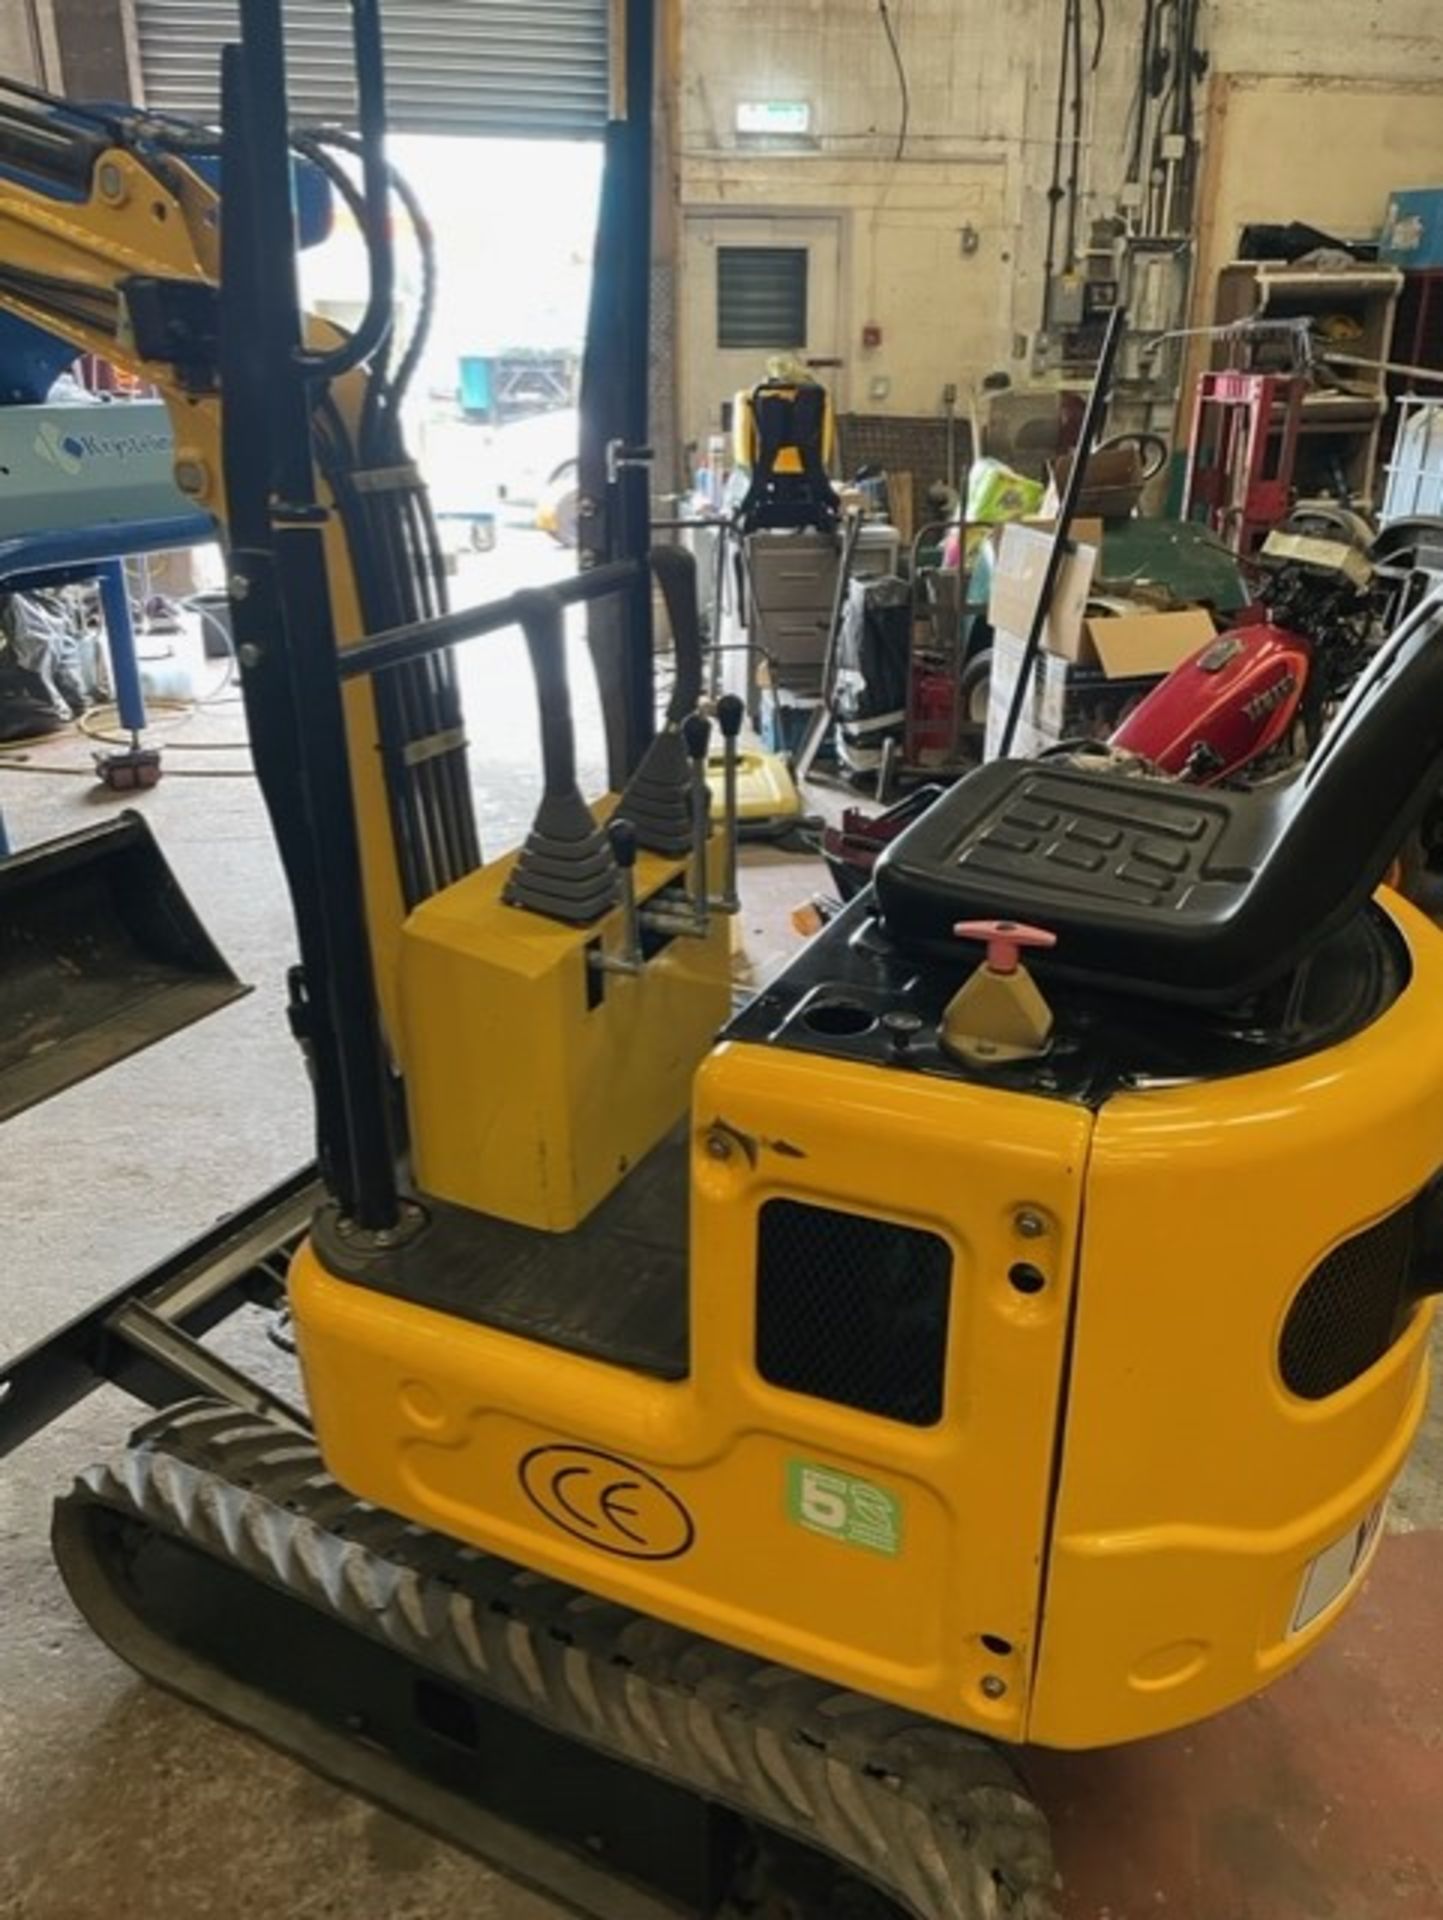 Rippa 1 ton excavator sweet little runner yanmar engine also hydraulics smooth for a little - Image 3 of 8